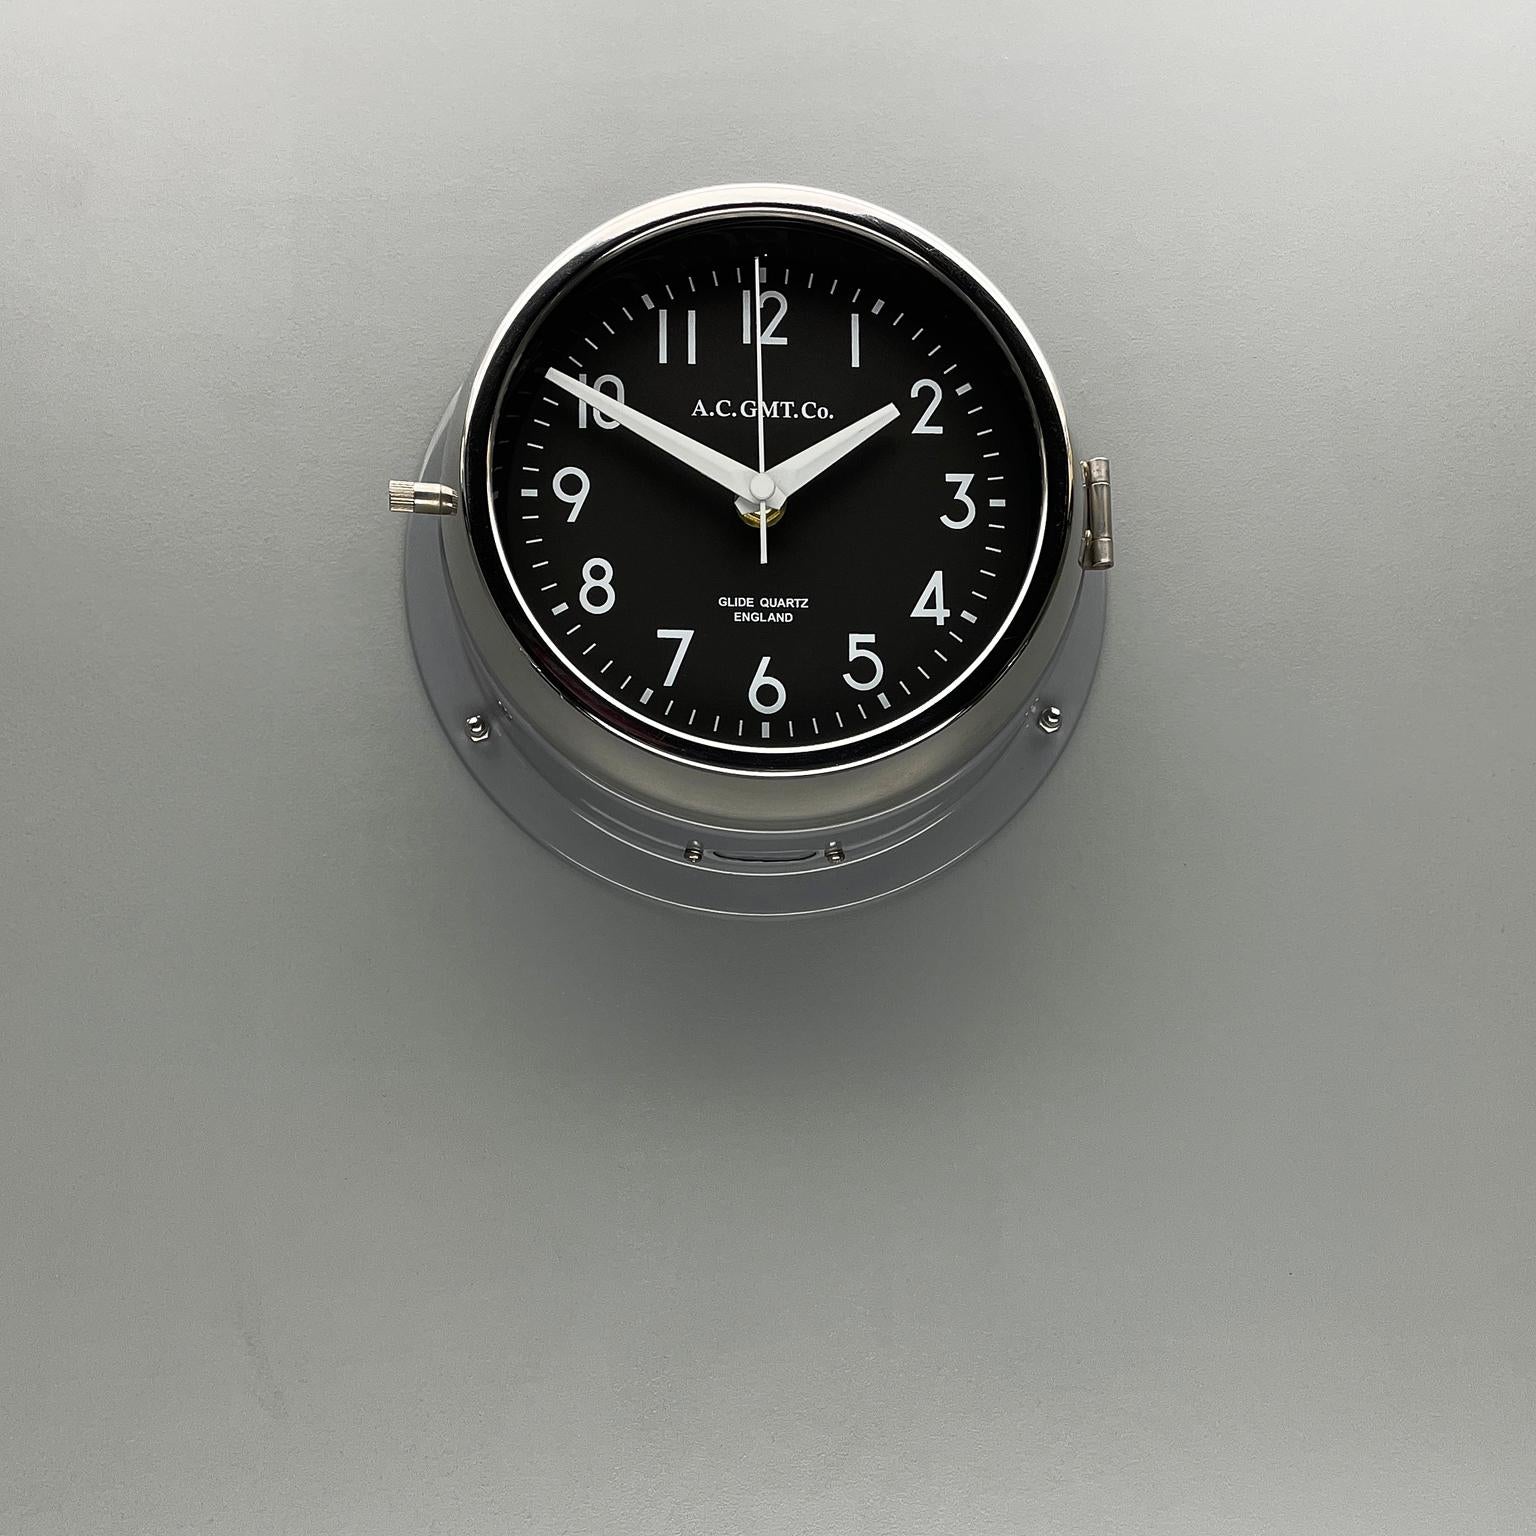 English 1970's British Ultimate Gray /Monochrome Black AC GMT Co. Classic Wall Clock For Sale